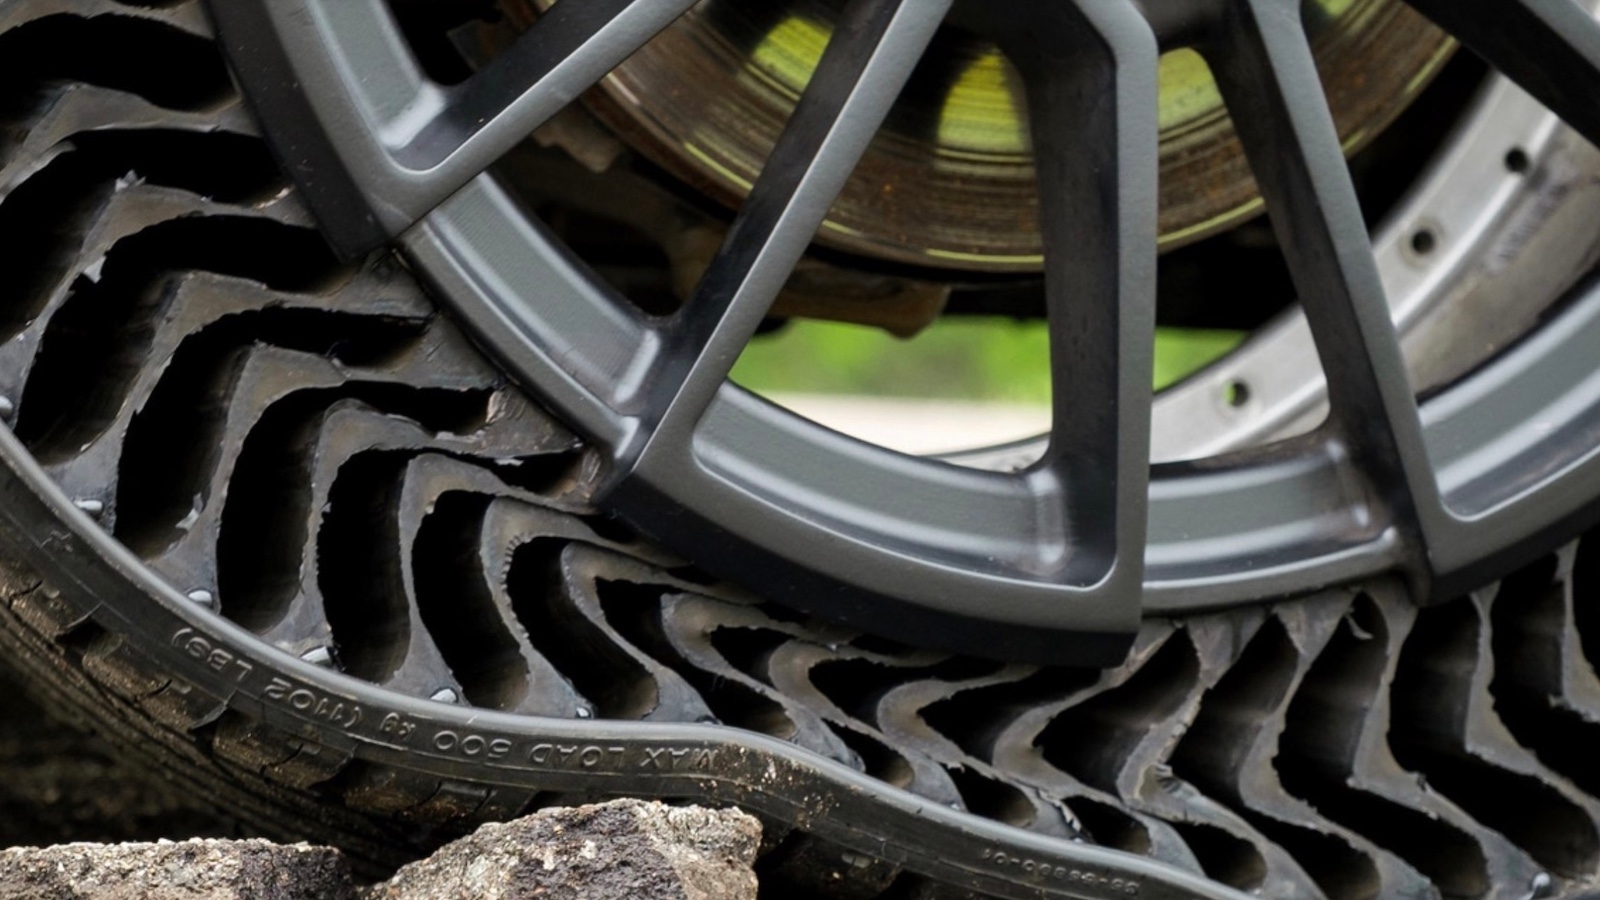 Construction And Industrial tyres  MICHELIN Commercial tyres United Kingdom